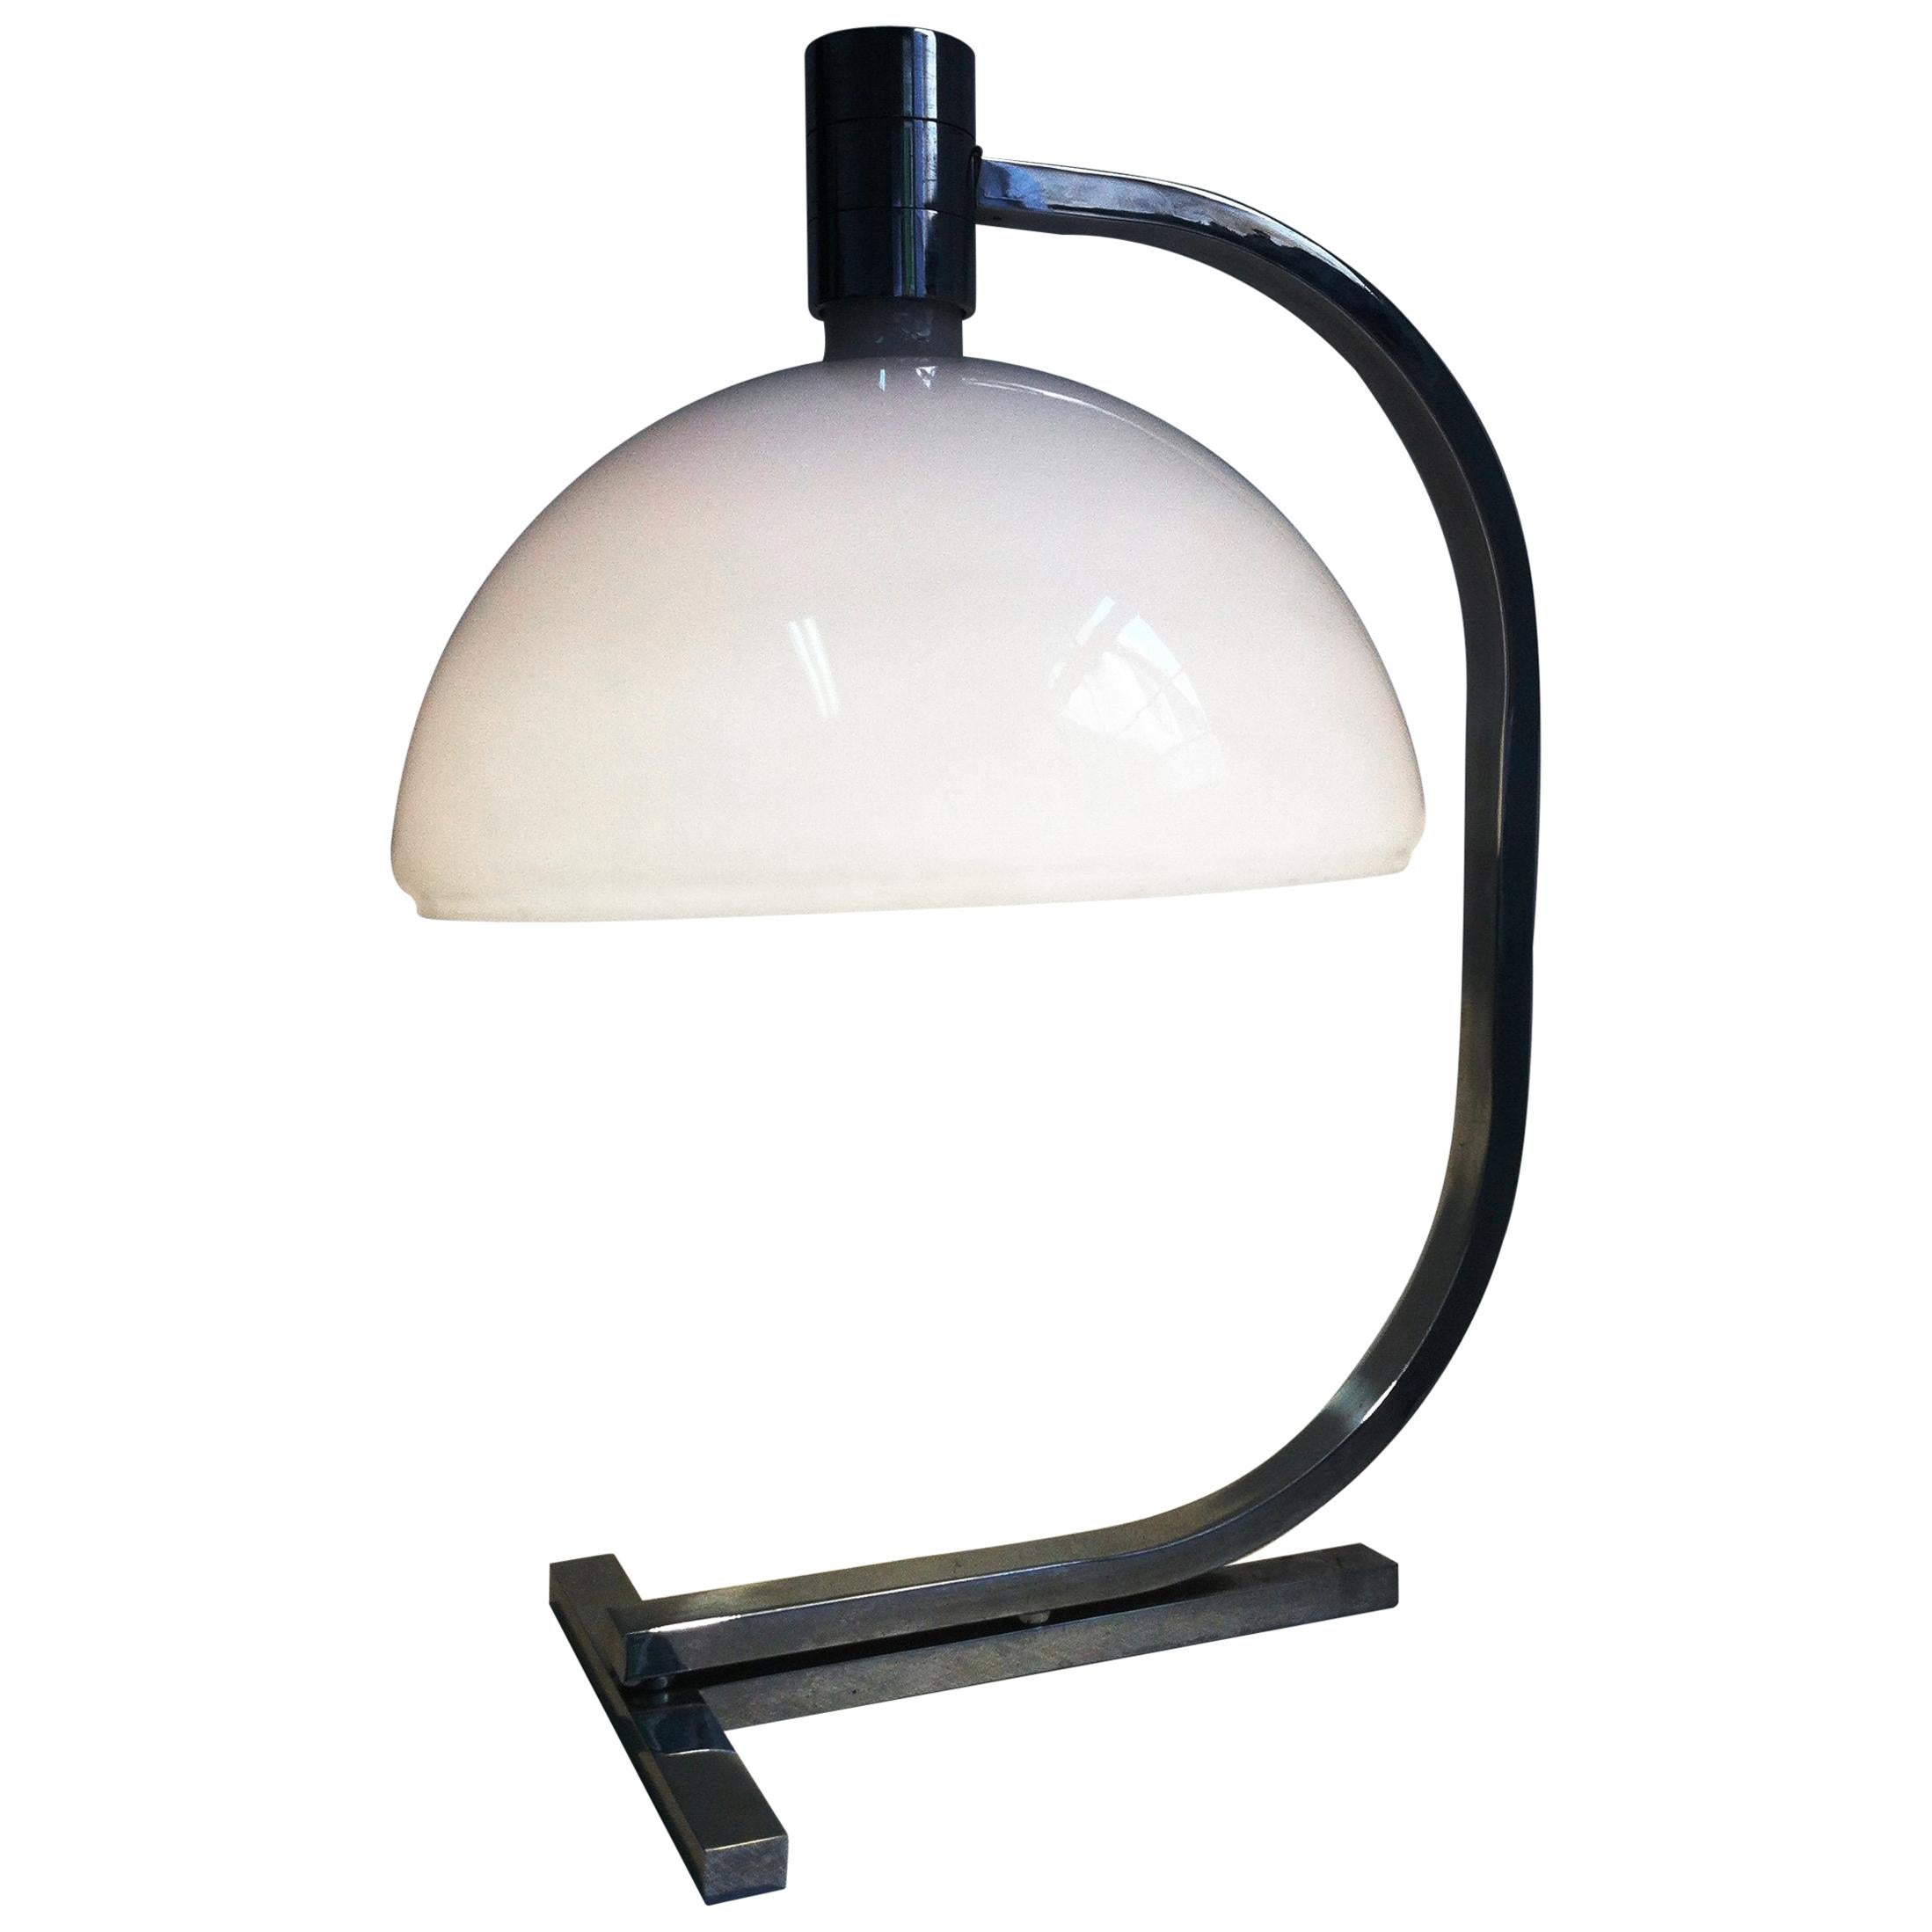 Midcentury AM/AS Table Lamp by Helg, Piva, and Albini for Sirrah Large, 1969 im Angebot